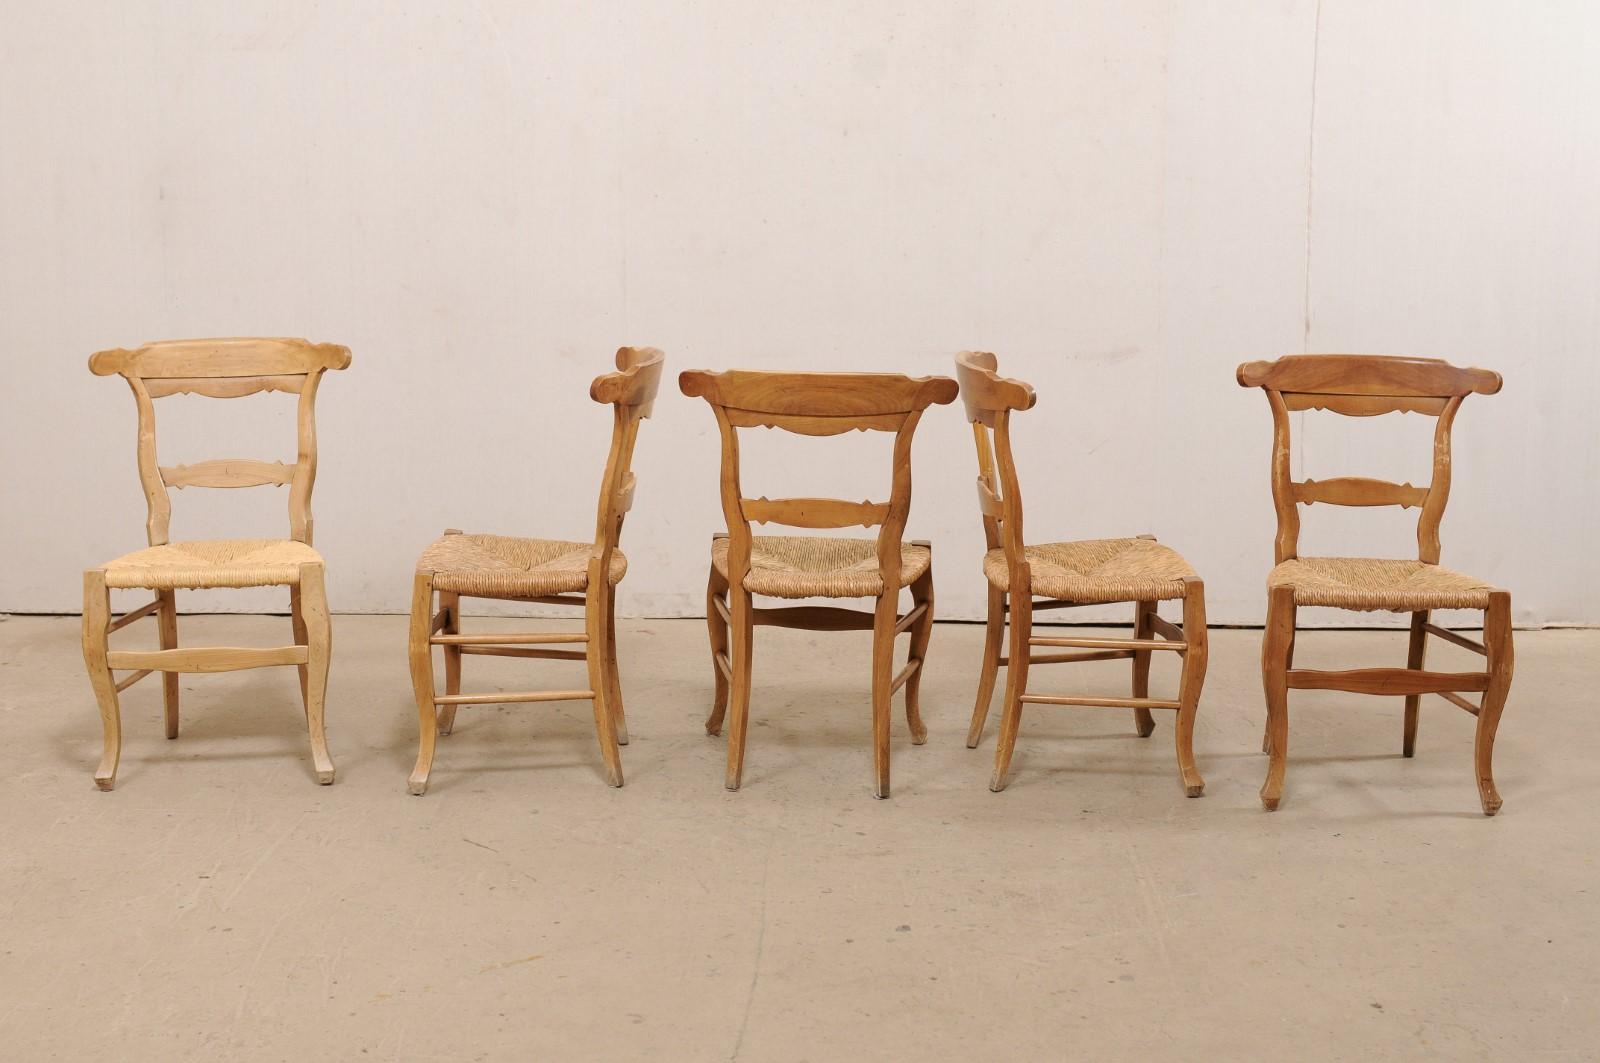 French Set of 8 Side Chairs with Hand-Woven Rush Seats, Early to Mid 20th C For Sale 1